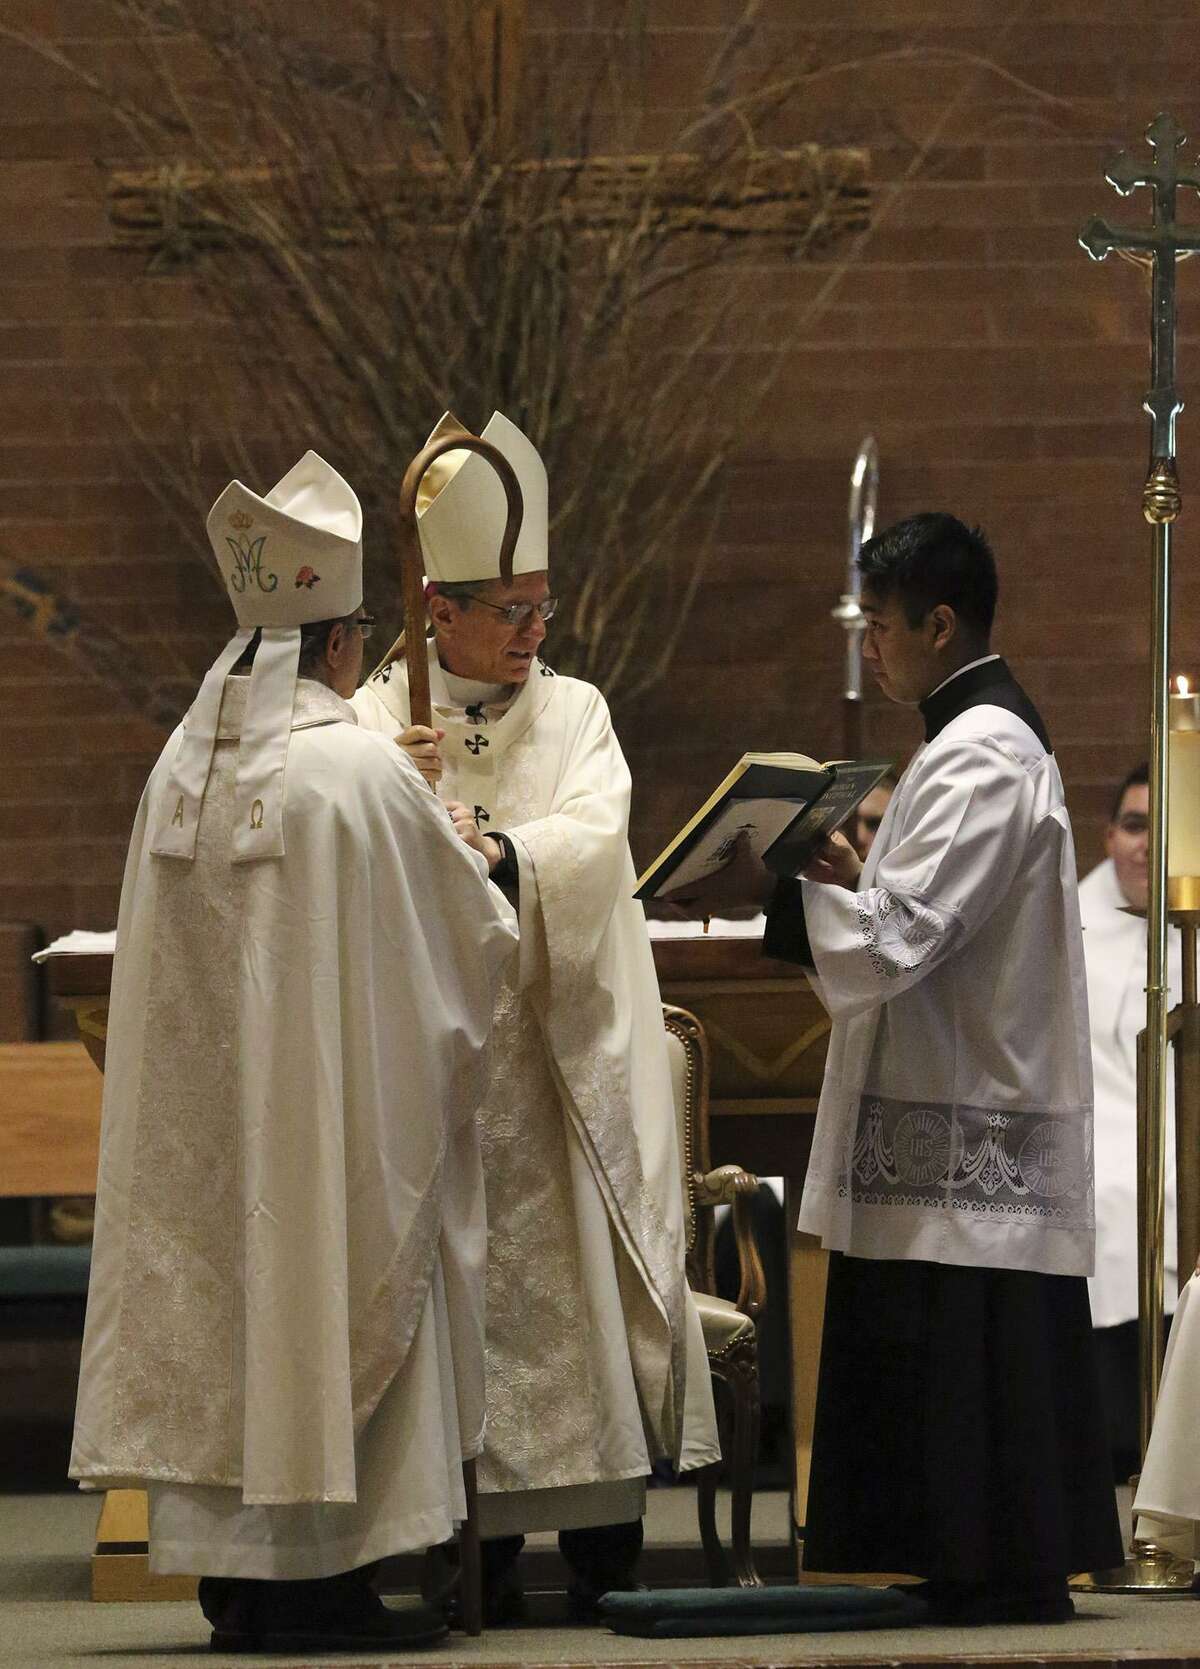 Archbishop Gustavo Garcia-Siller (center) hands Michael Boulette a crosier Monday March 20, 2017 during Boulette's ordination at St. Mark the Evangelist Catholic Parish. Boulette is now Auxiliary Bishop of the Archdiocese of San Antonio.